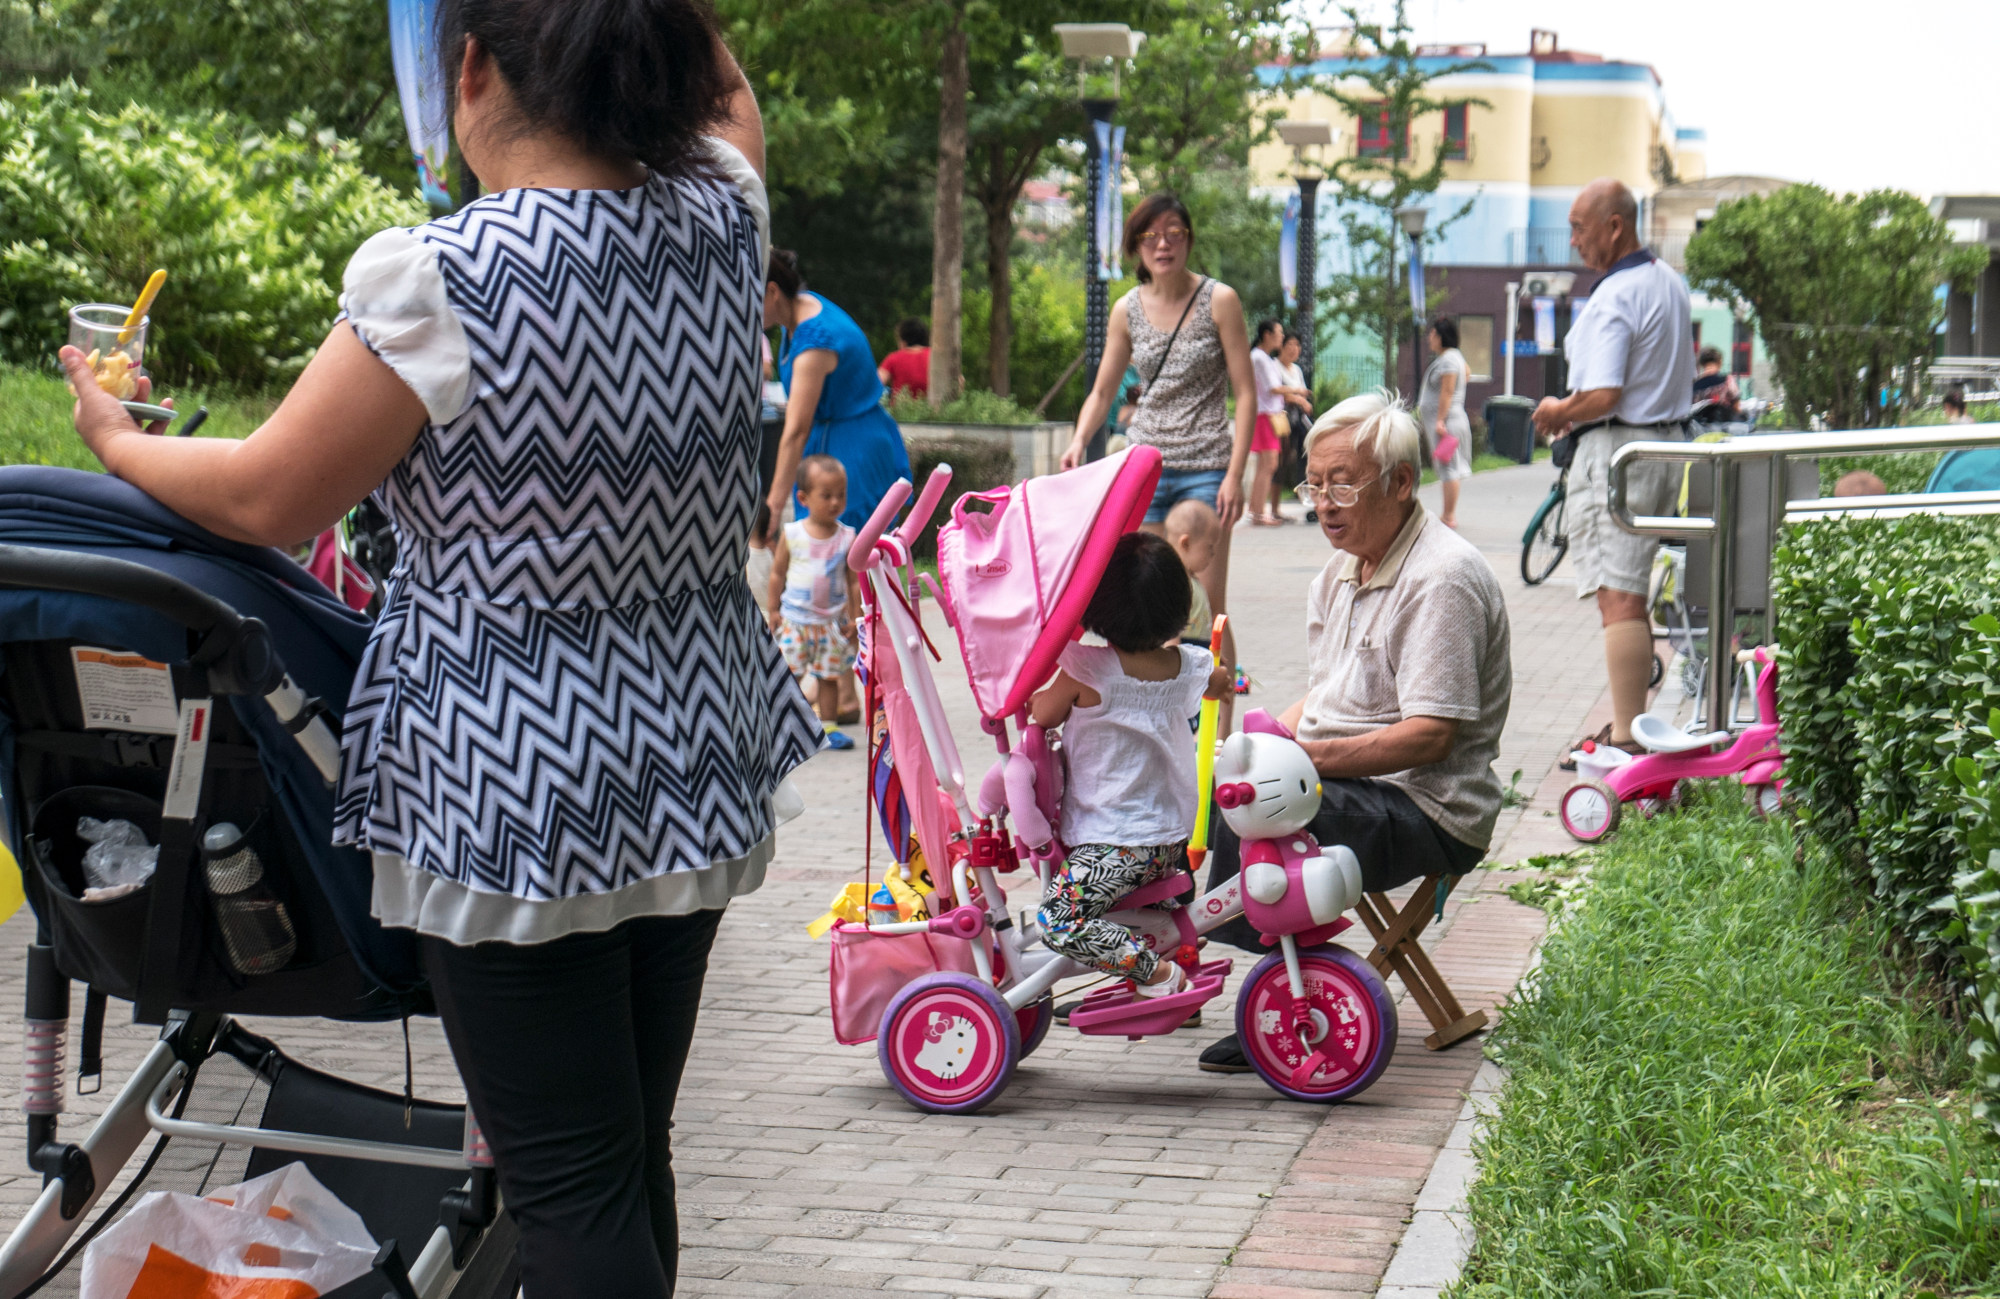 Young parents in China tend to think the grandparents dote on the children. Photo: Getty Images